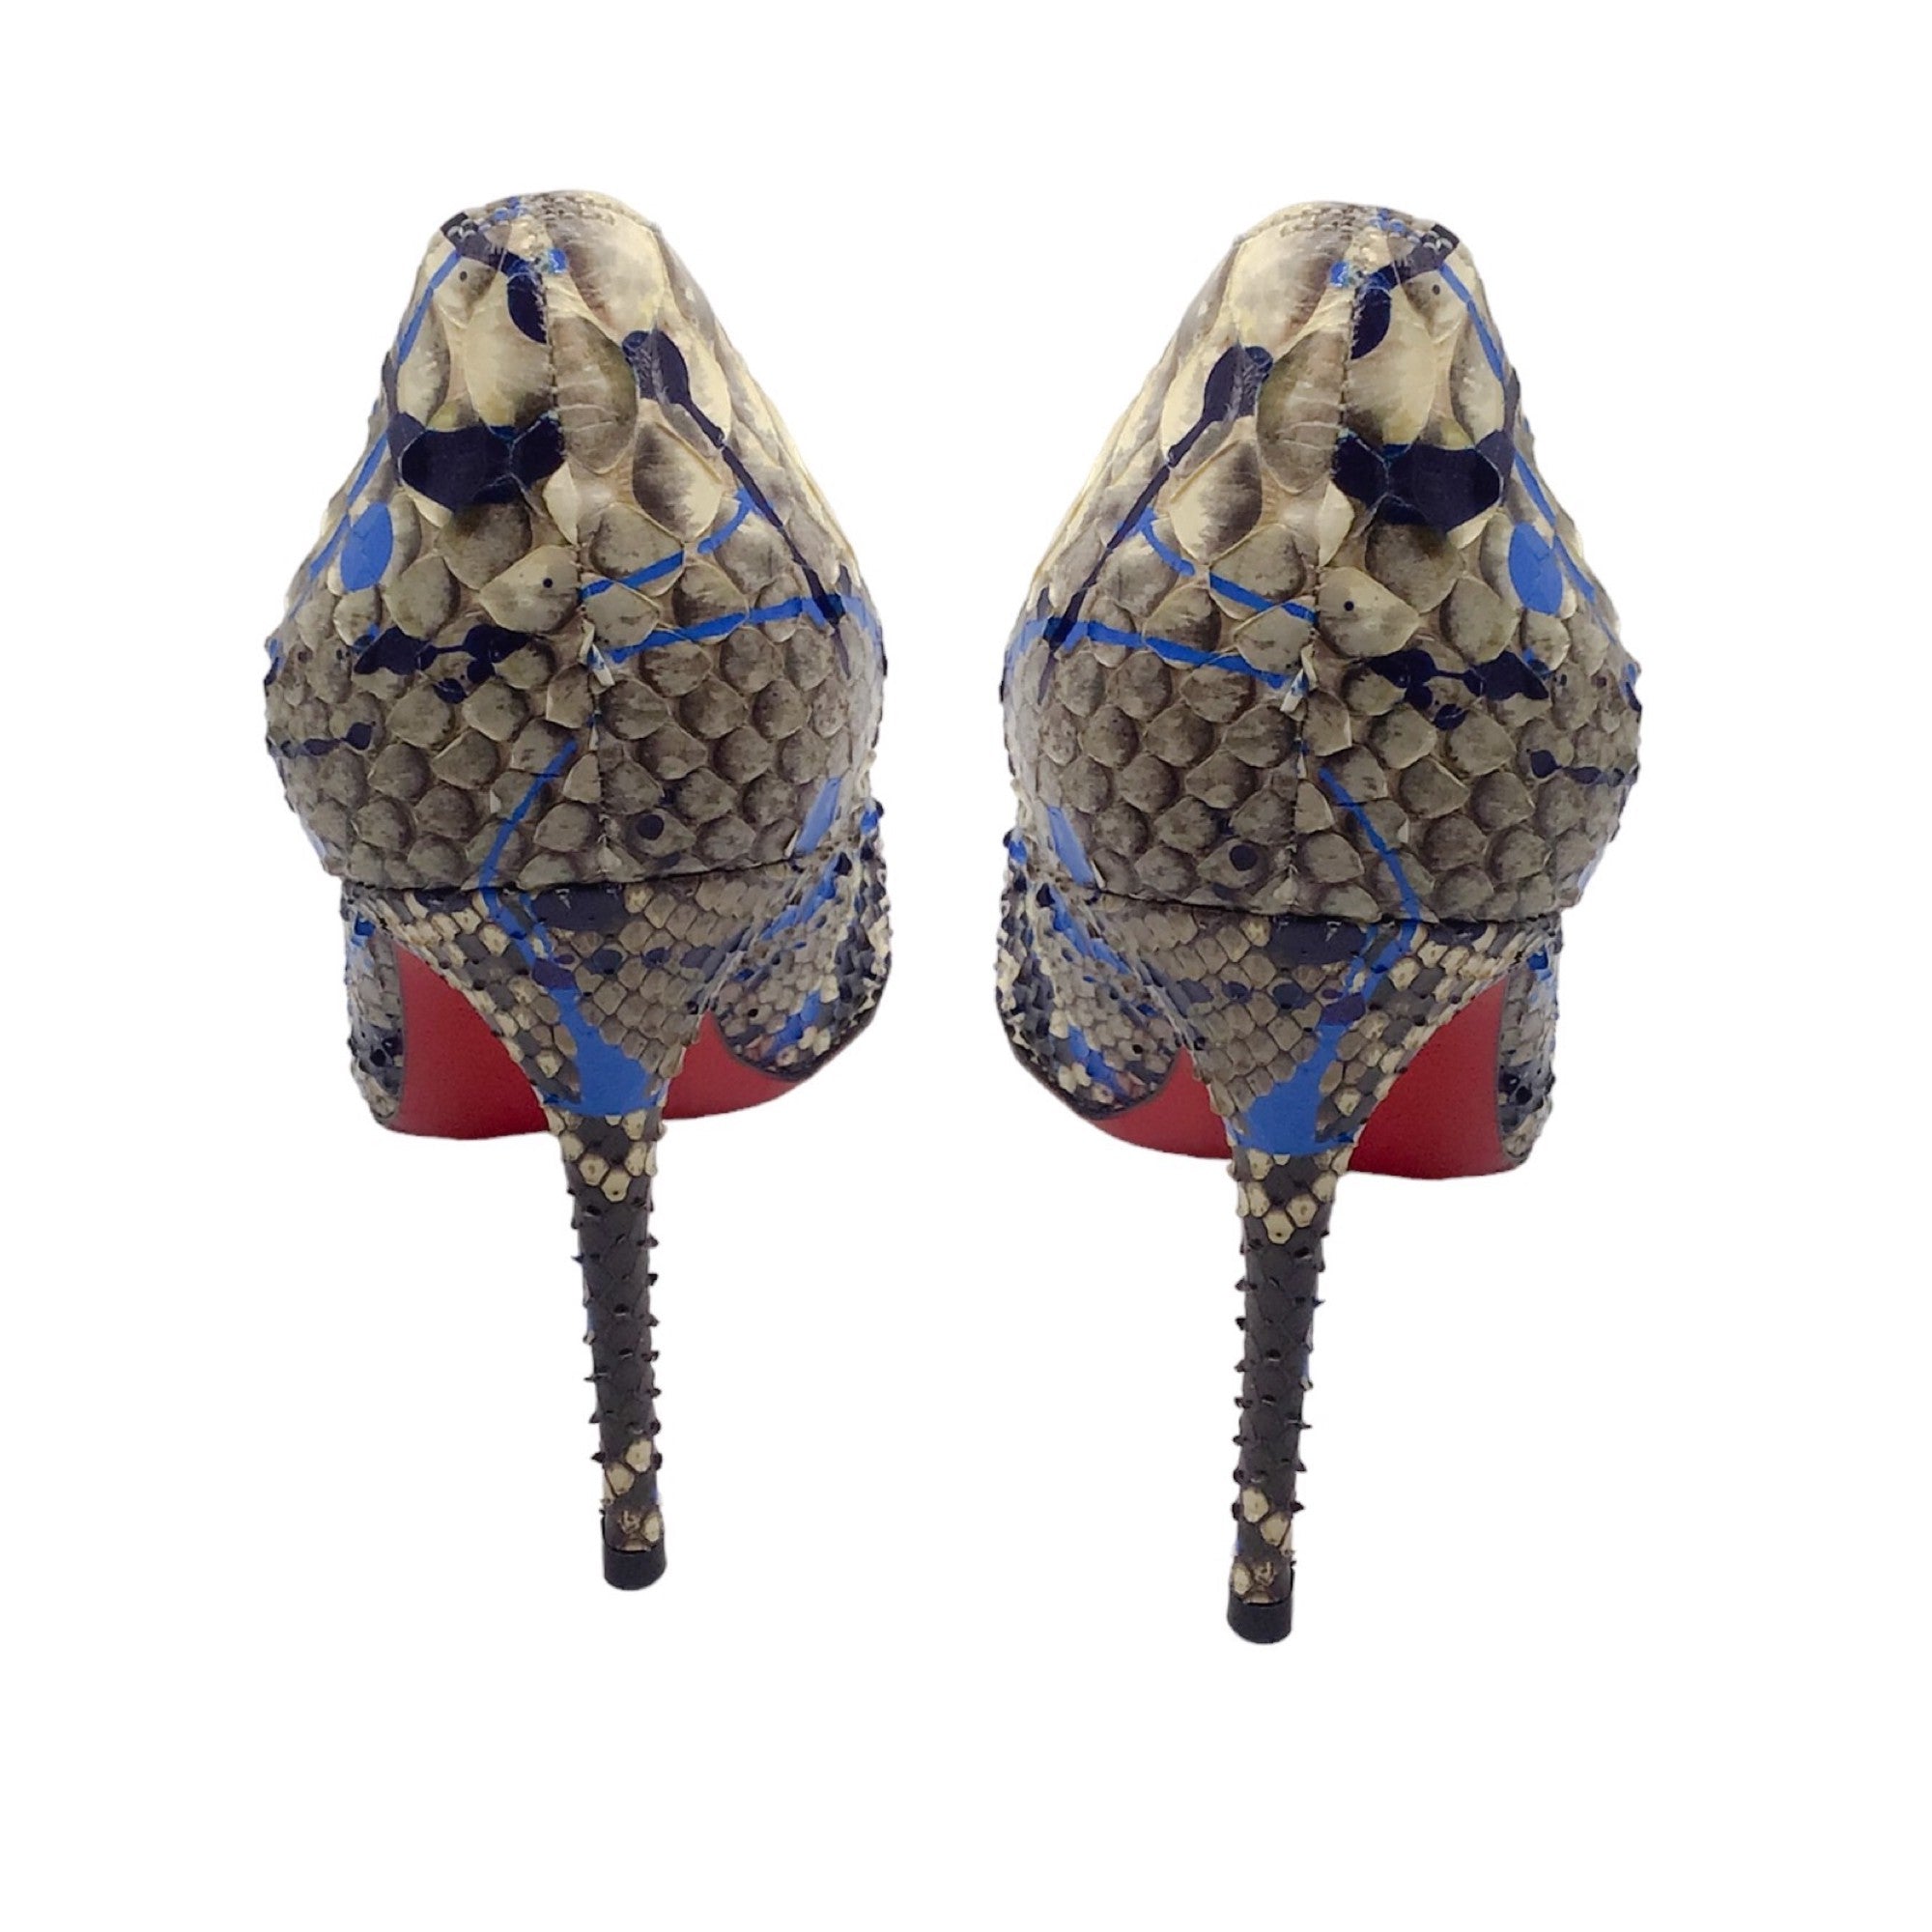 Christian Louboutin Ivory / Blue / Navy Paint Splatter Python Skin Leather High Heeled Pointed Toe Pumps